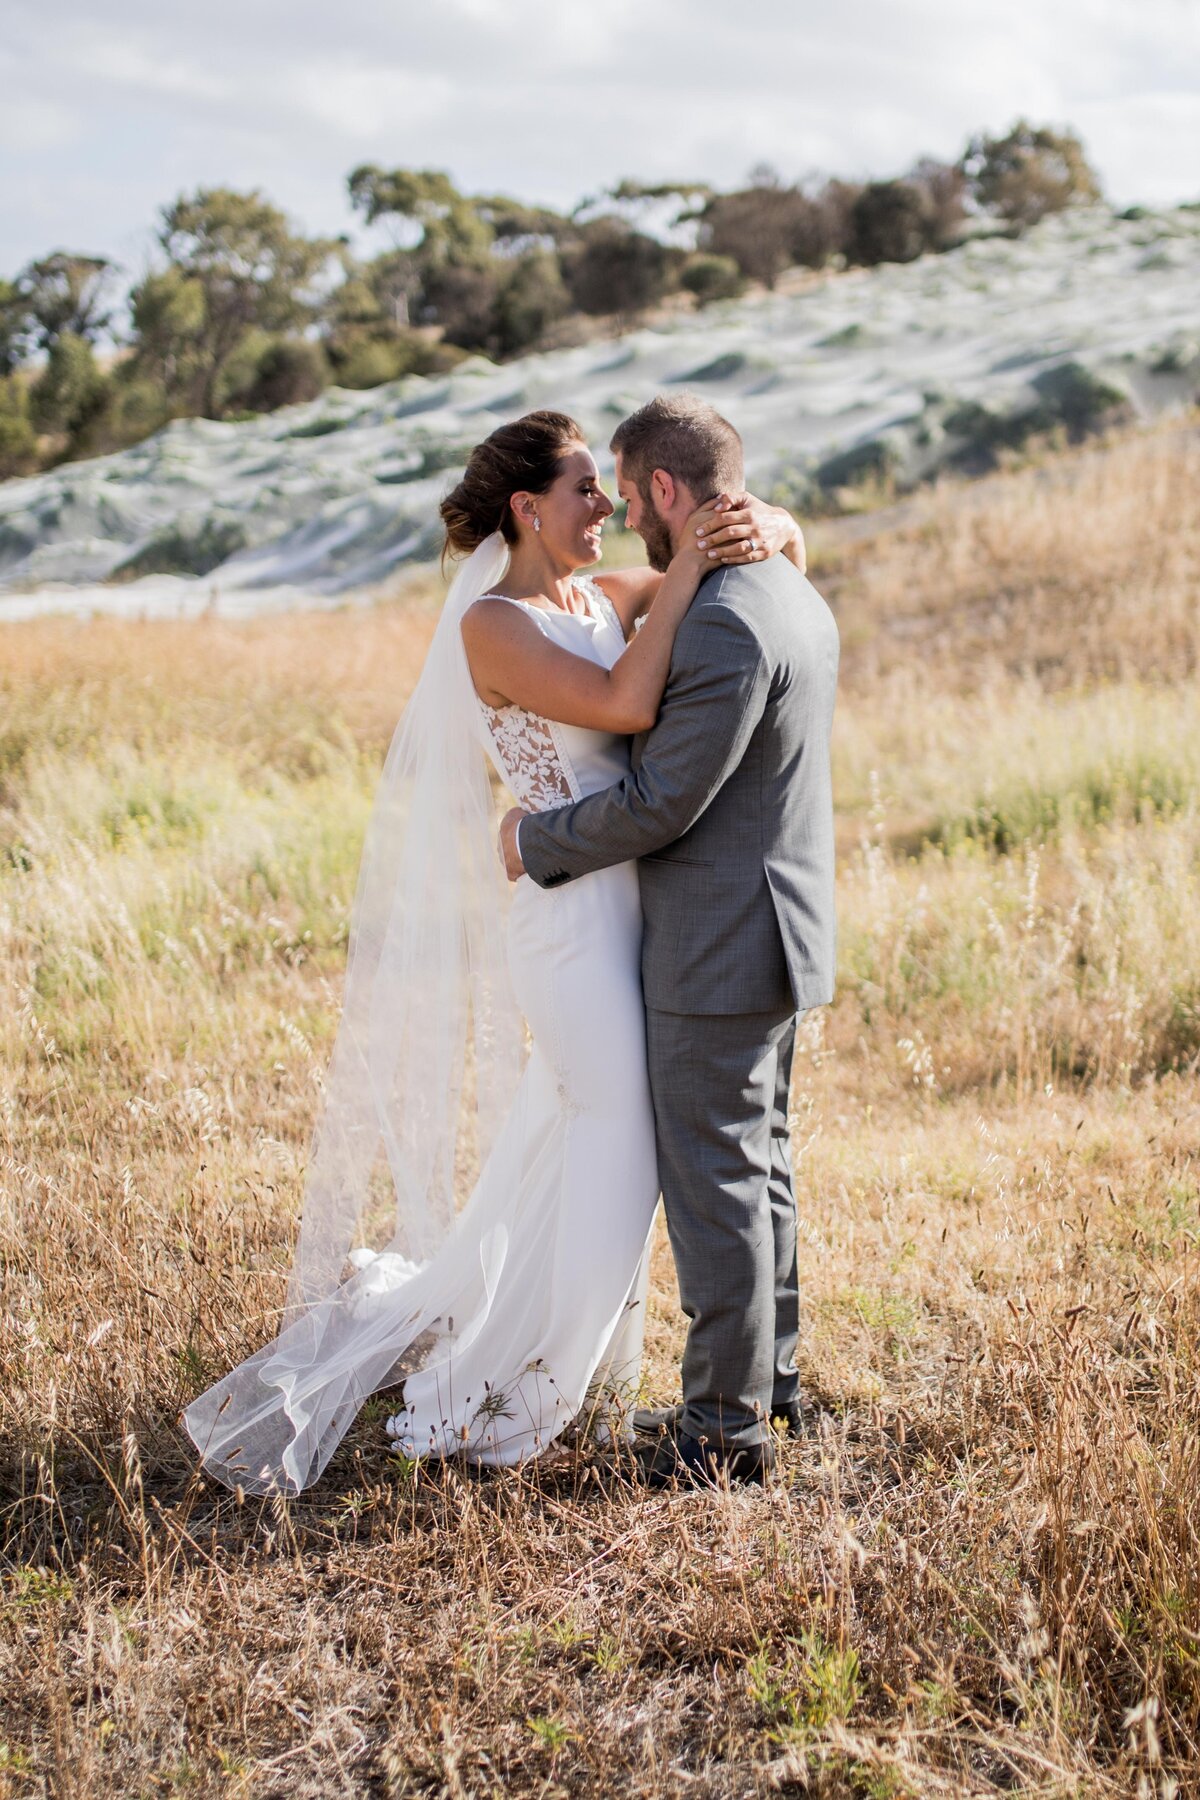 S&T-Paxton-Wines-Rexvil-Photography-Adelaide-Wedding-Photographer-147